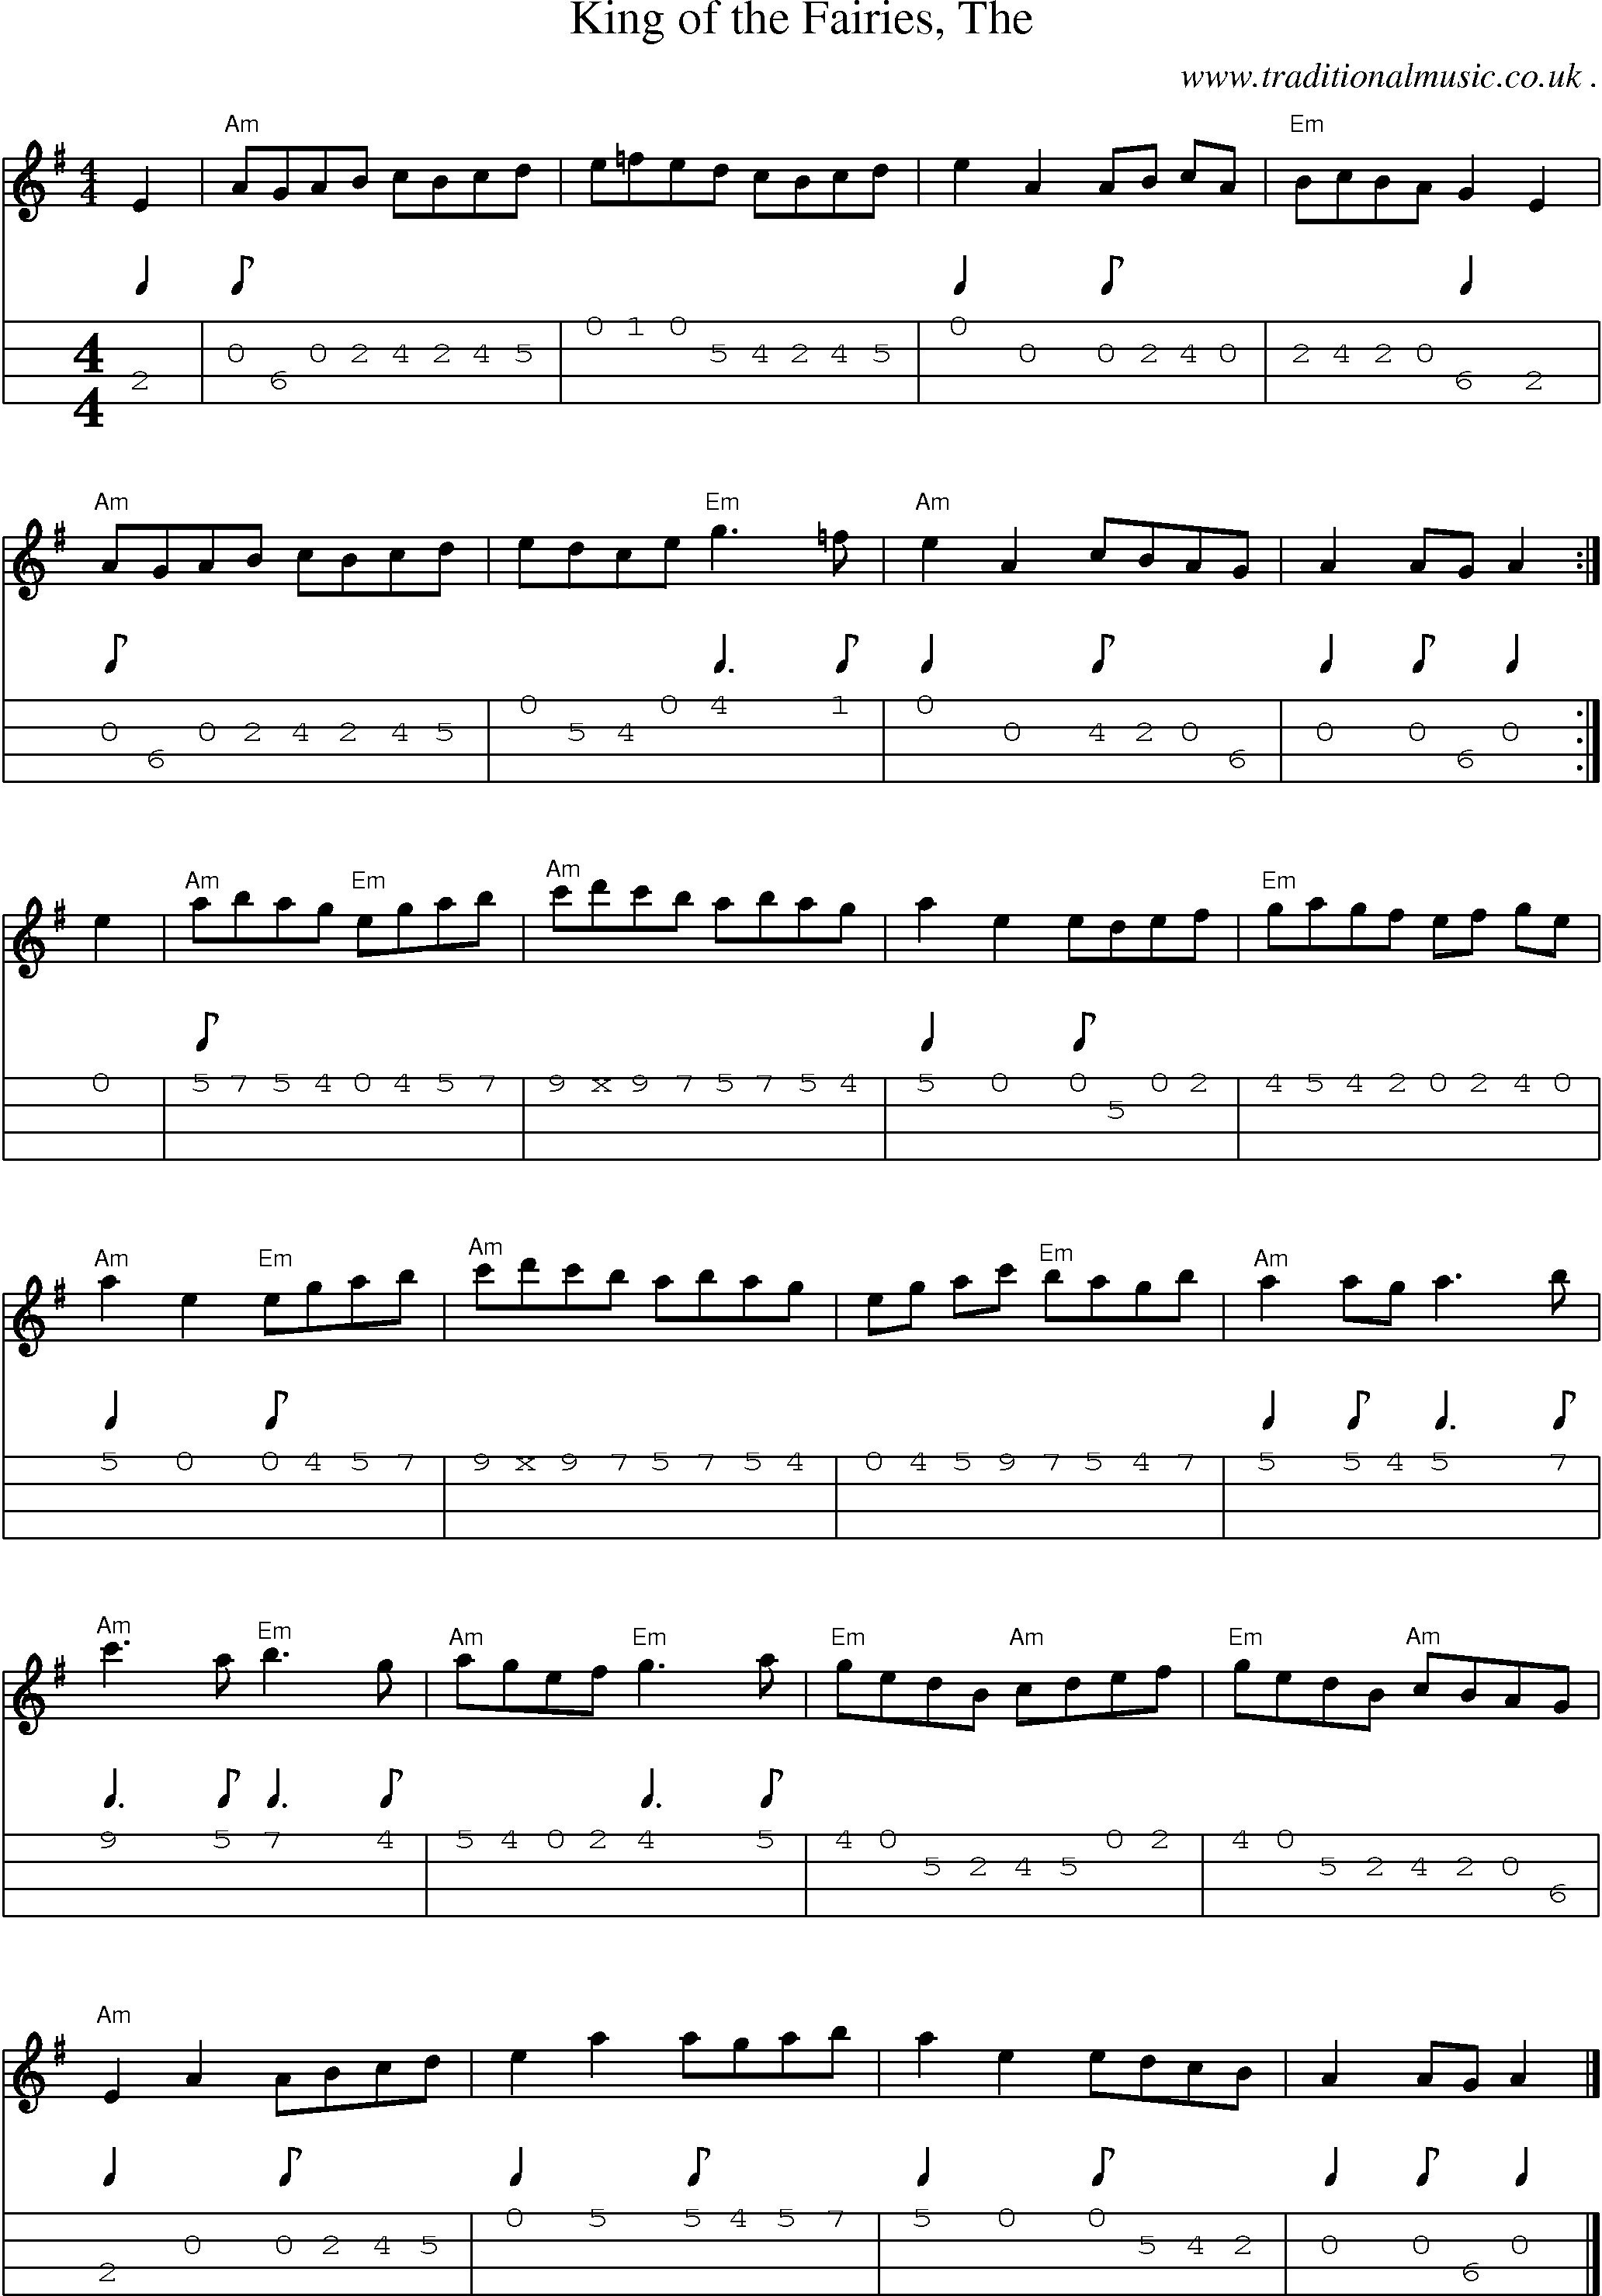 Music Score and Guitar Tabs for King of the Fairies The